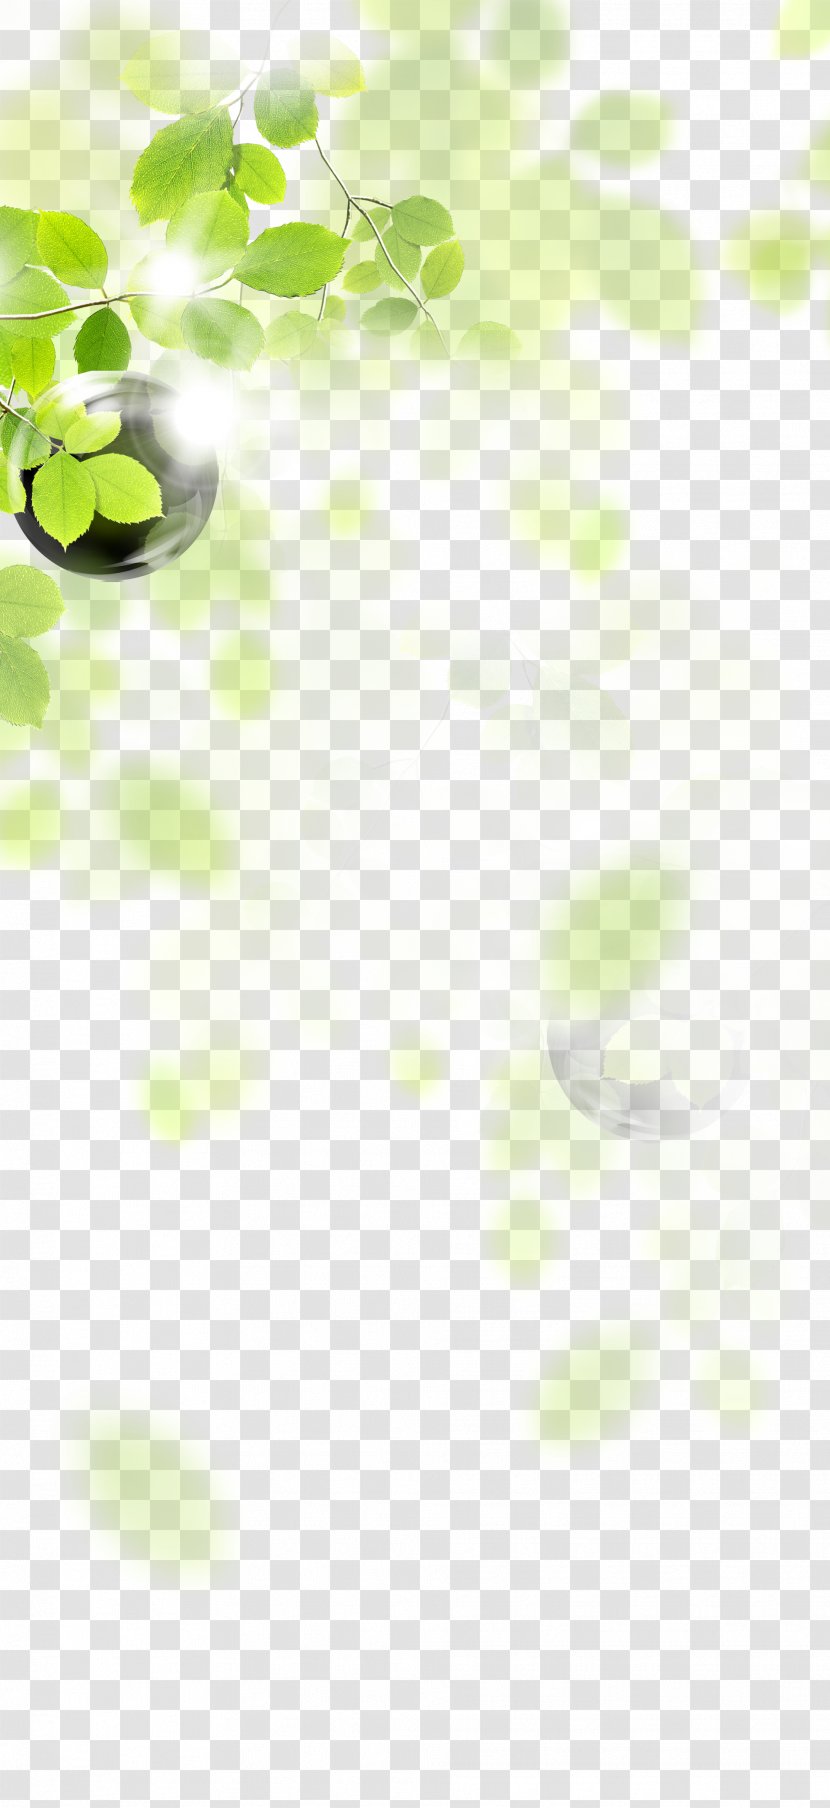 Green Leaf Angle LINE Pattern - Grass - Leaves, Decoration, Taobao Creative, Transparent PNG